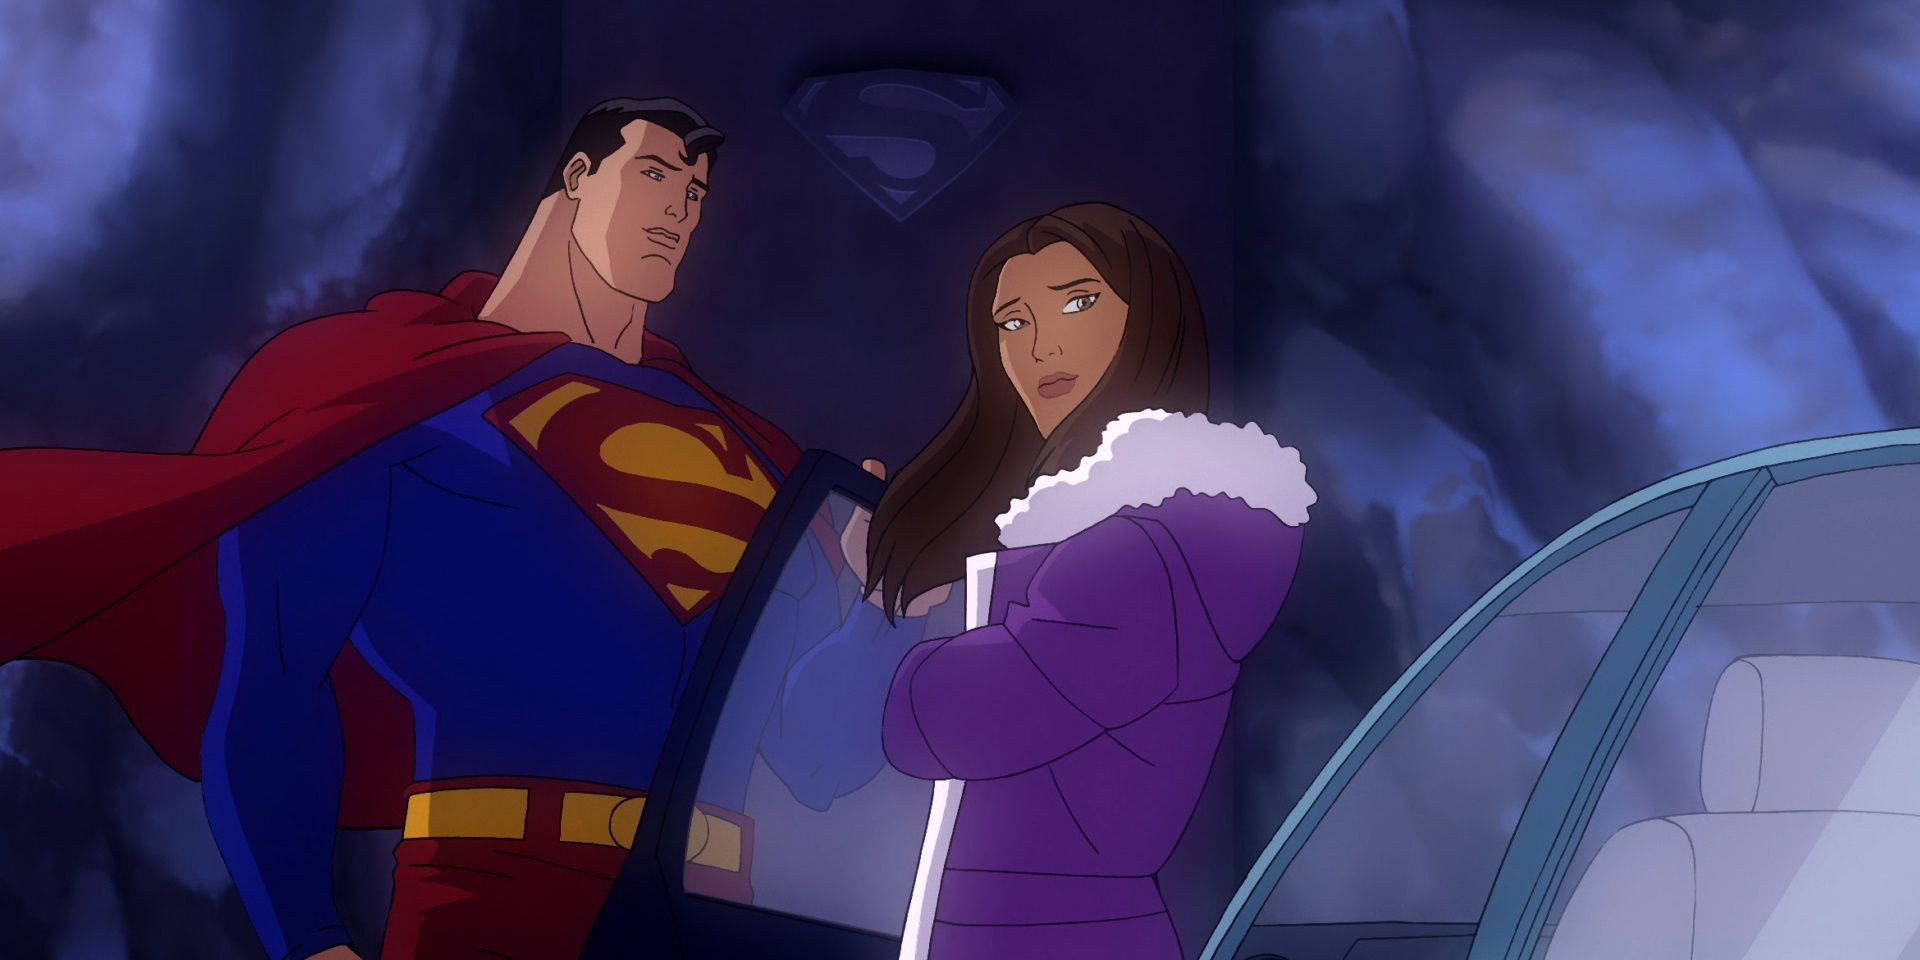 Superma and Lois Lane in All Star Superman